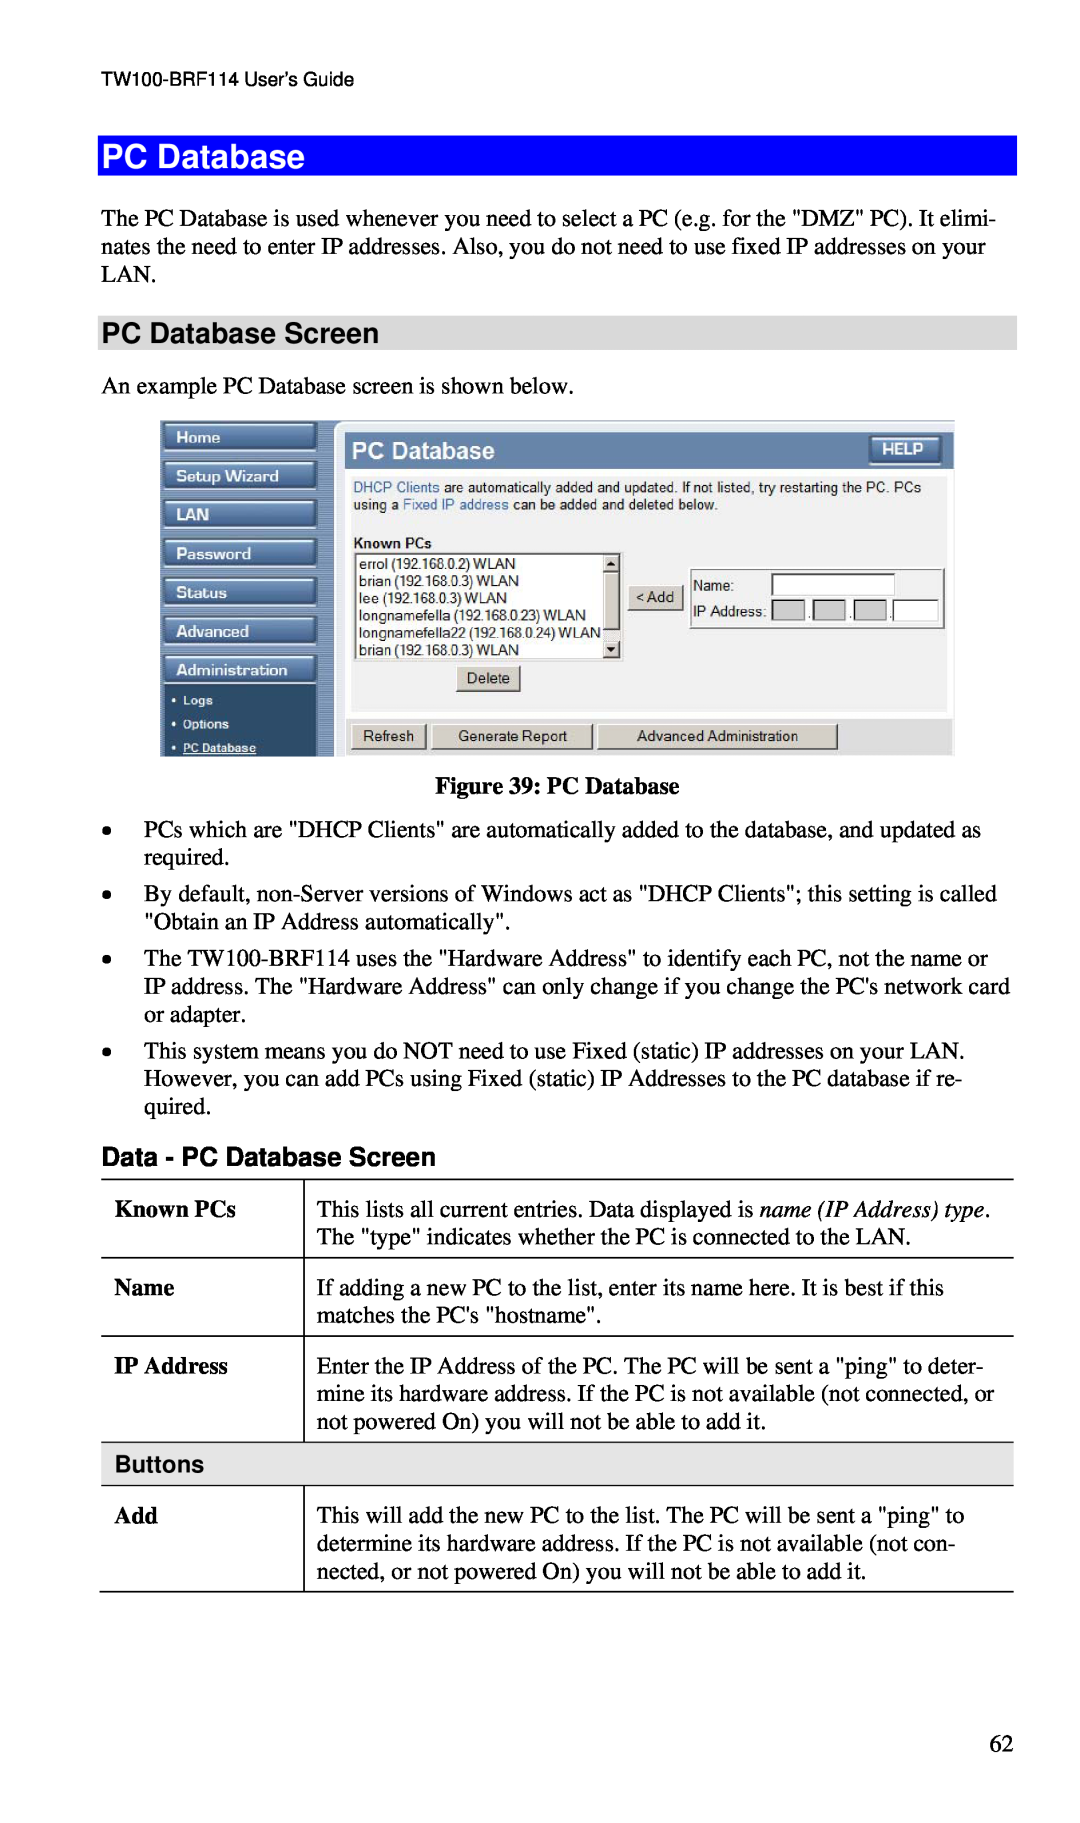 TRENDnet BRF114 manual PC Database Screen, Known PCs, Name, IP Address, Buttons 